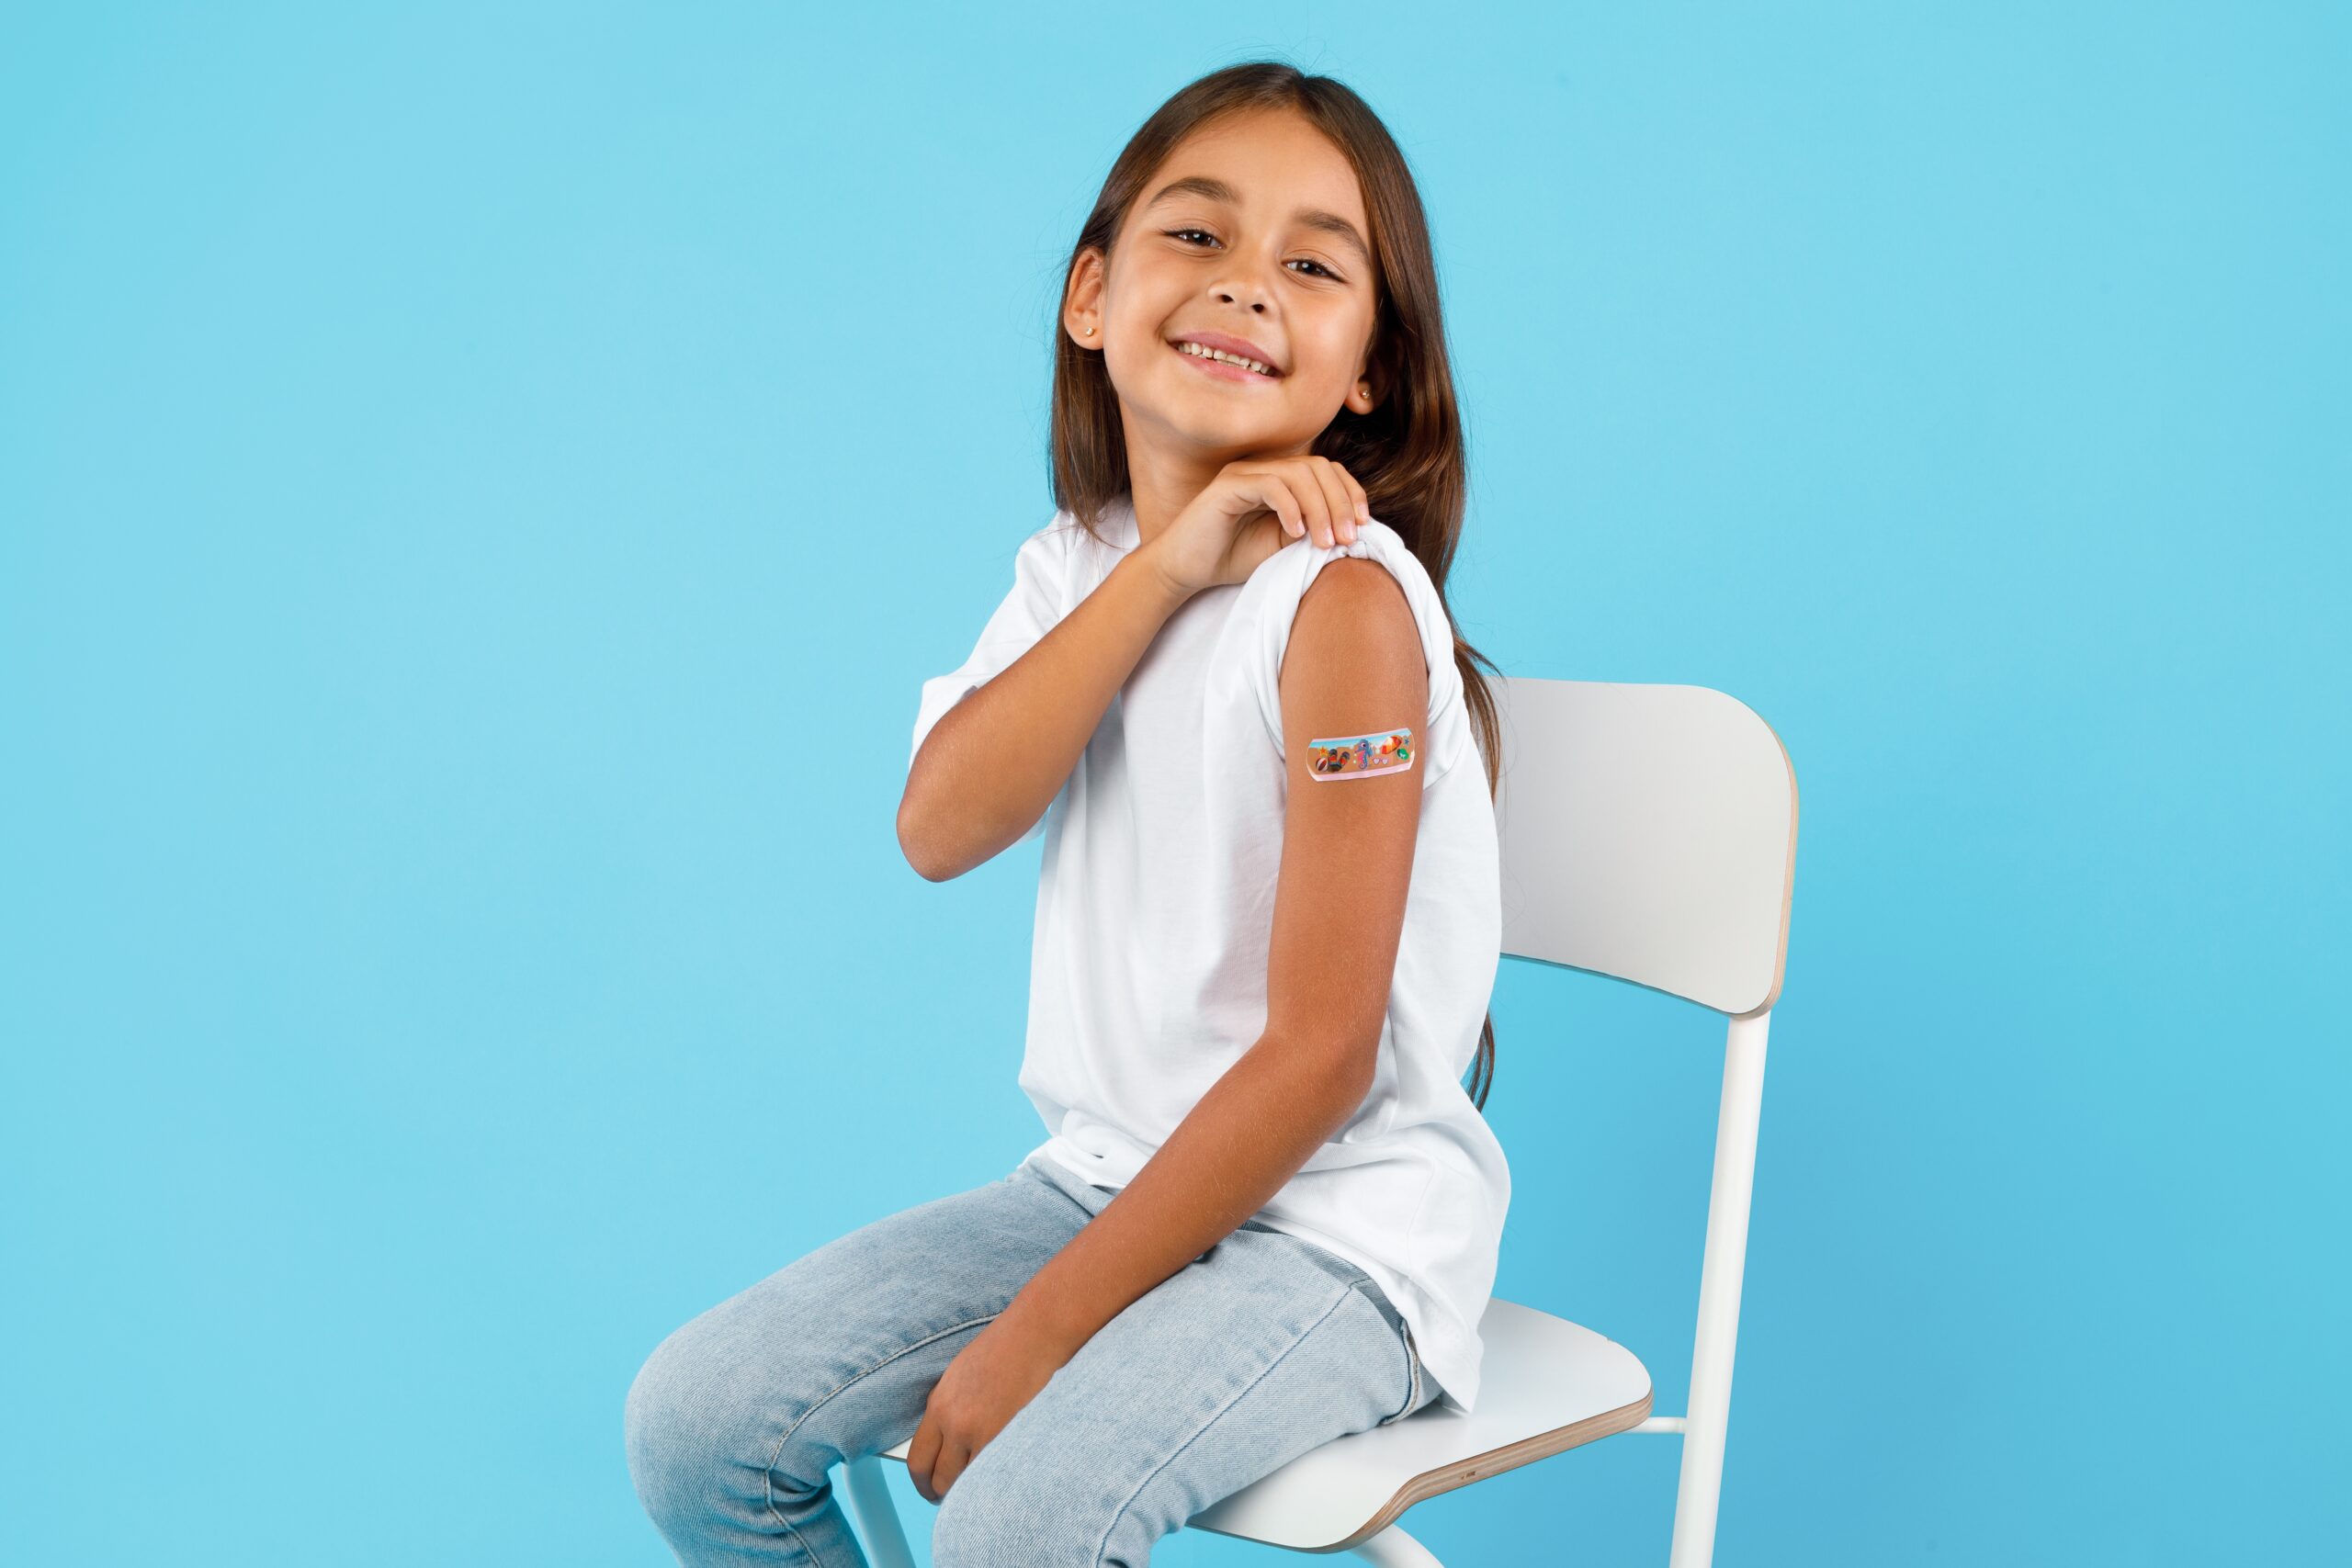 Young girl in chair showing her bandage after getting a vaccine